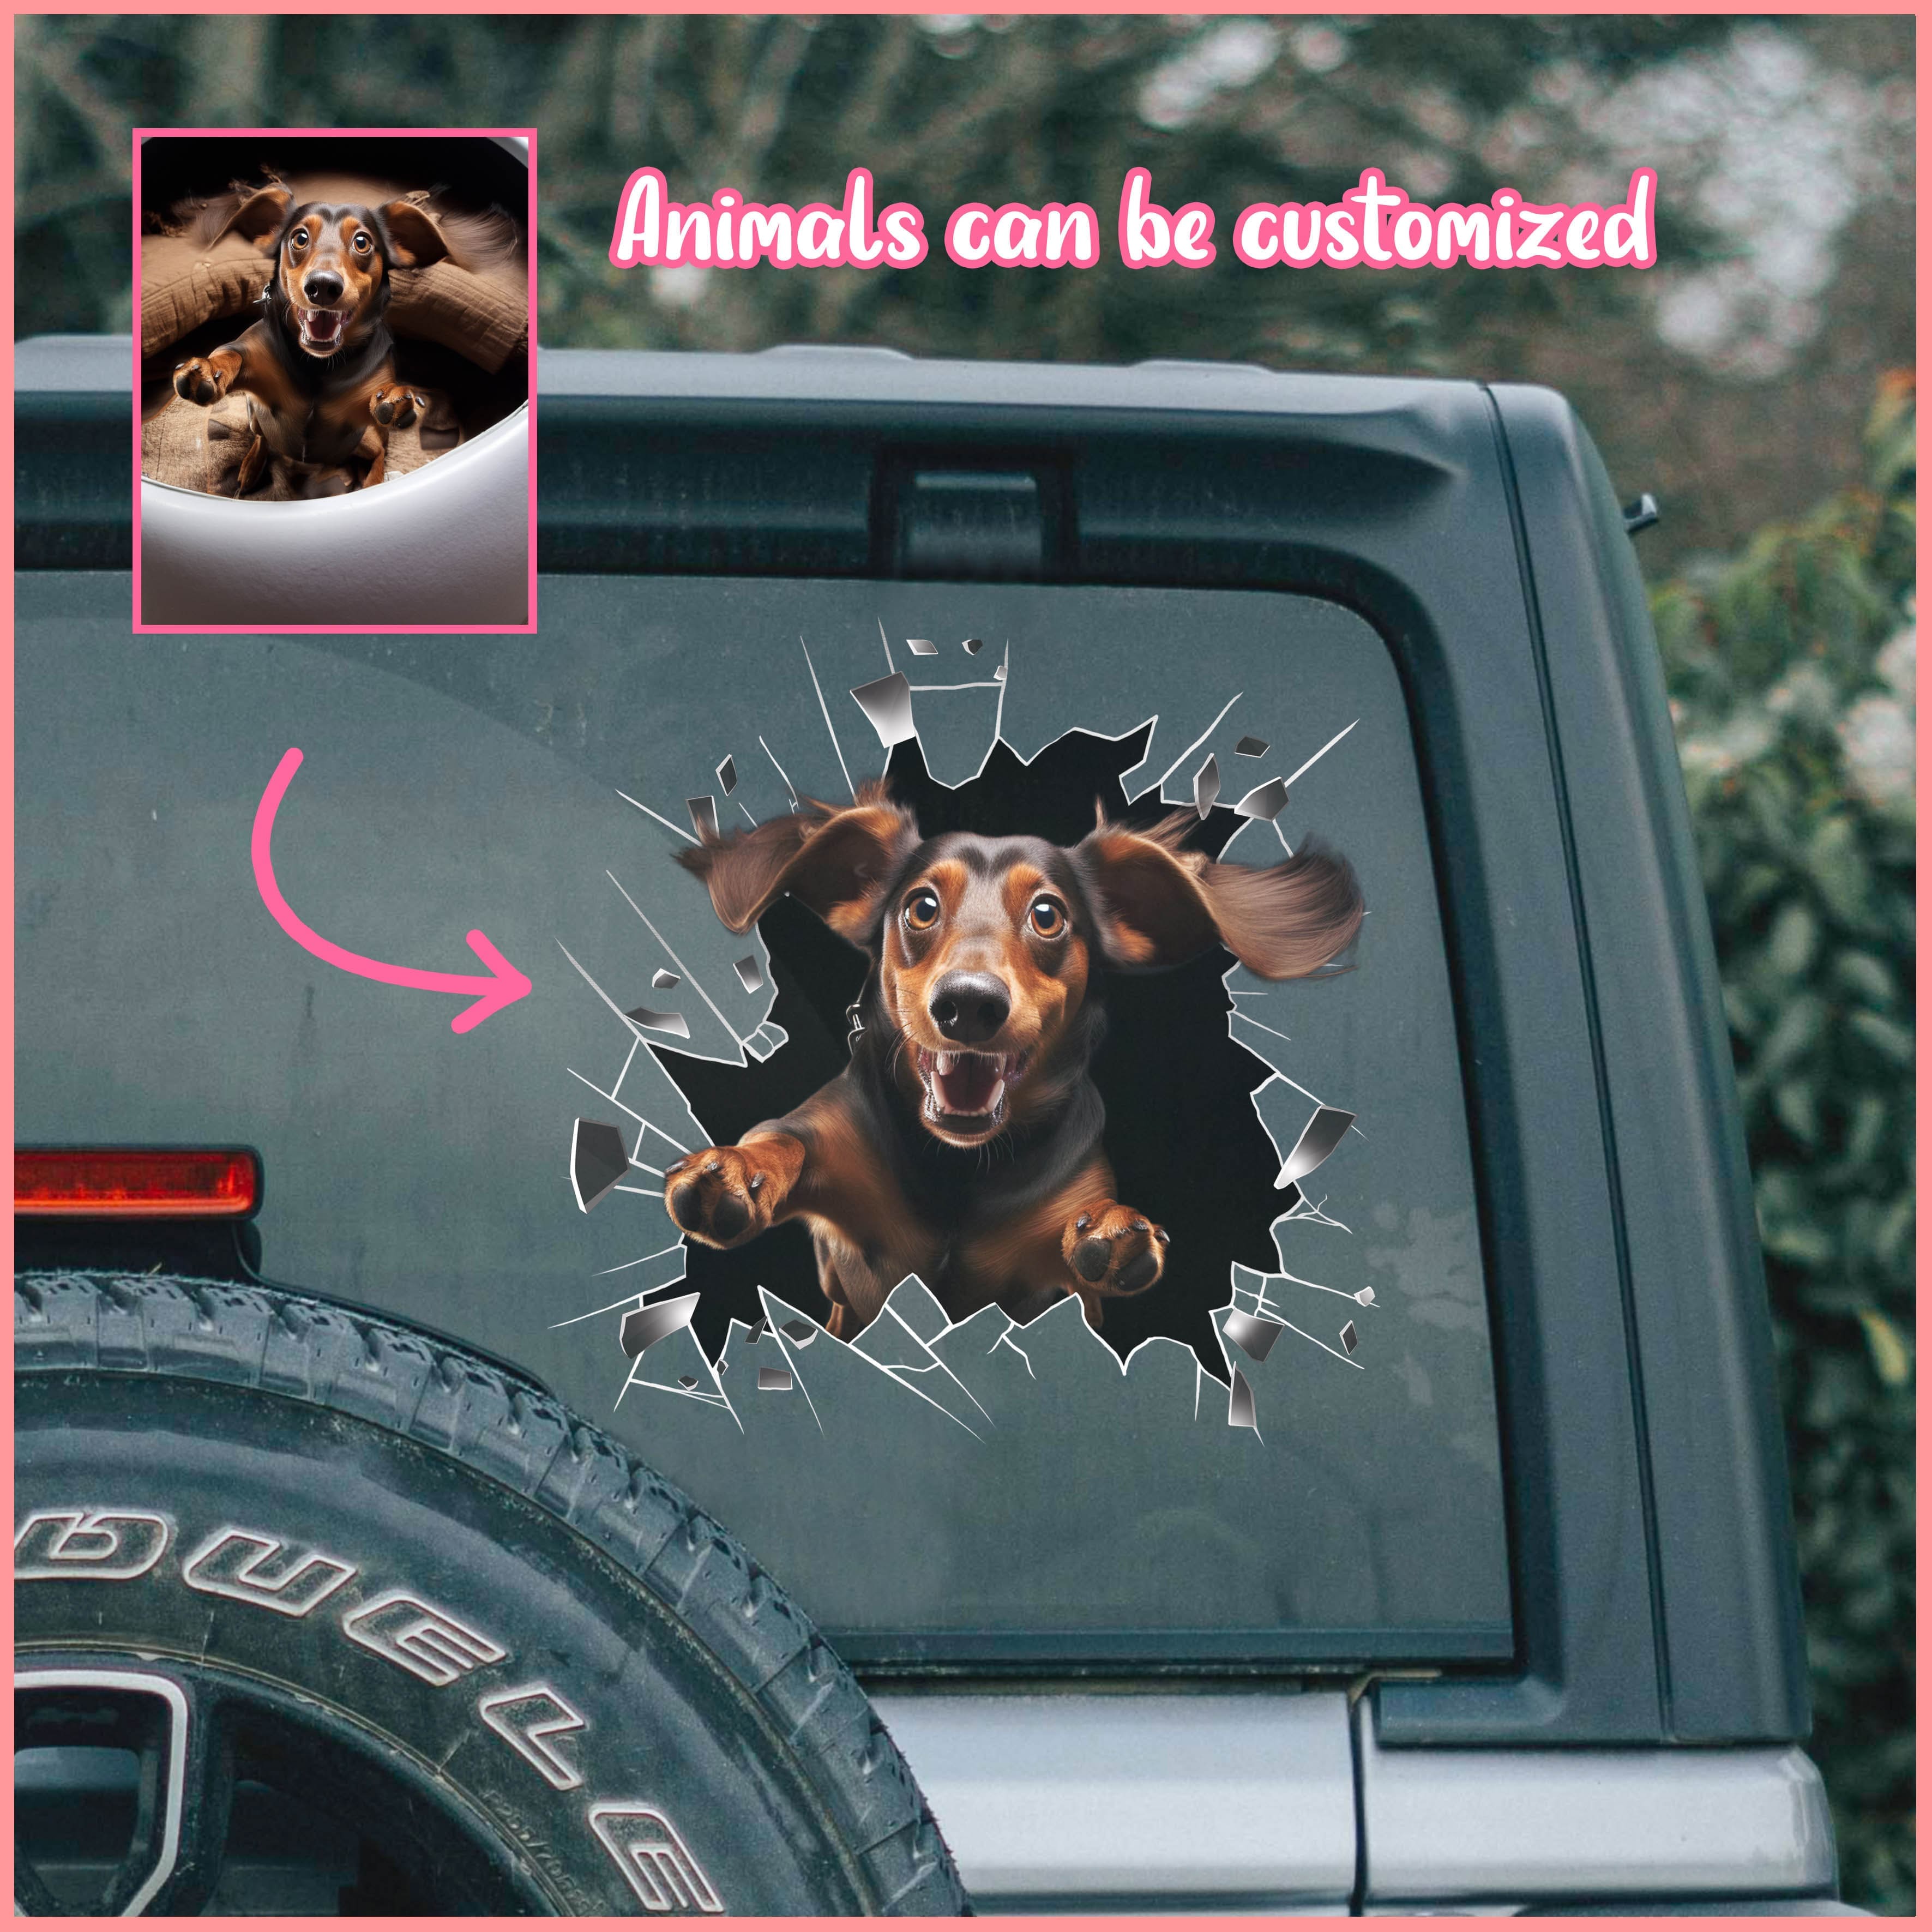 Dachshund car decal, Animals can be customized